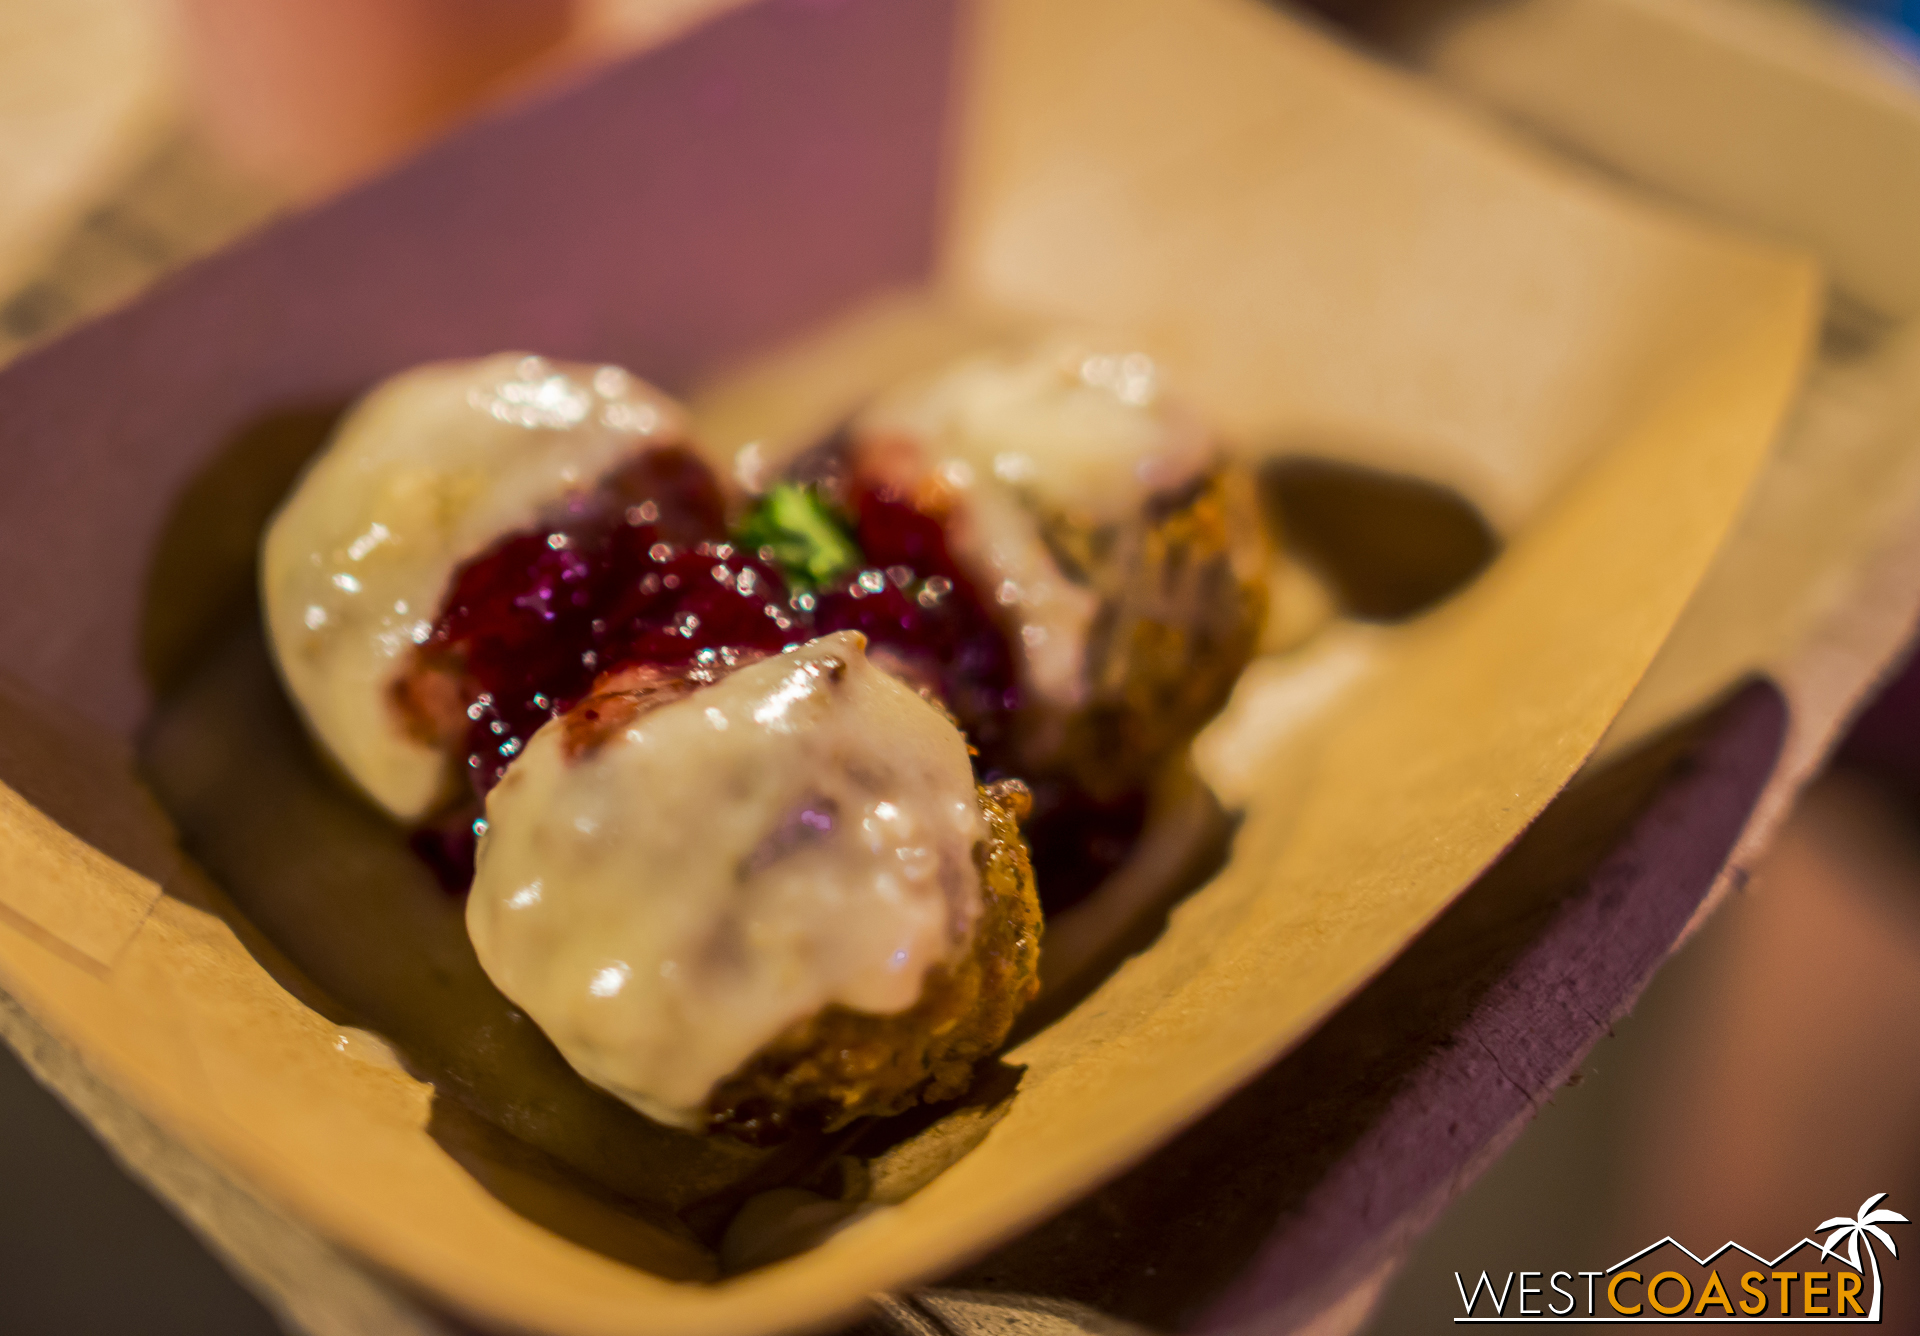  Holiday Swedish Meatballs with Creamy Brown Gravy and Lingonberry Sauce 